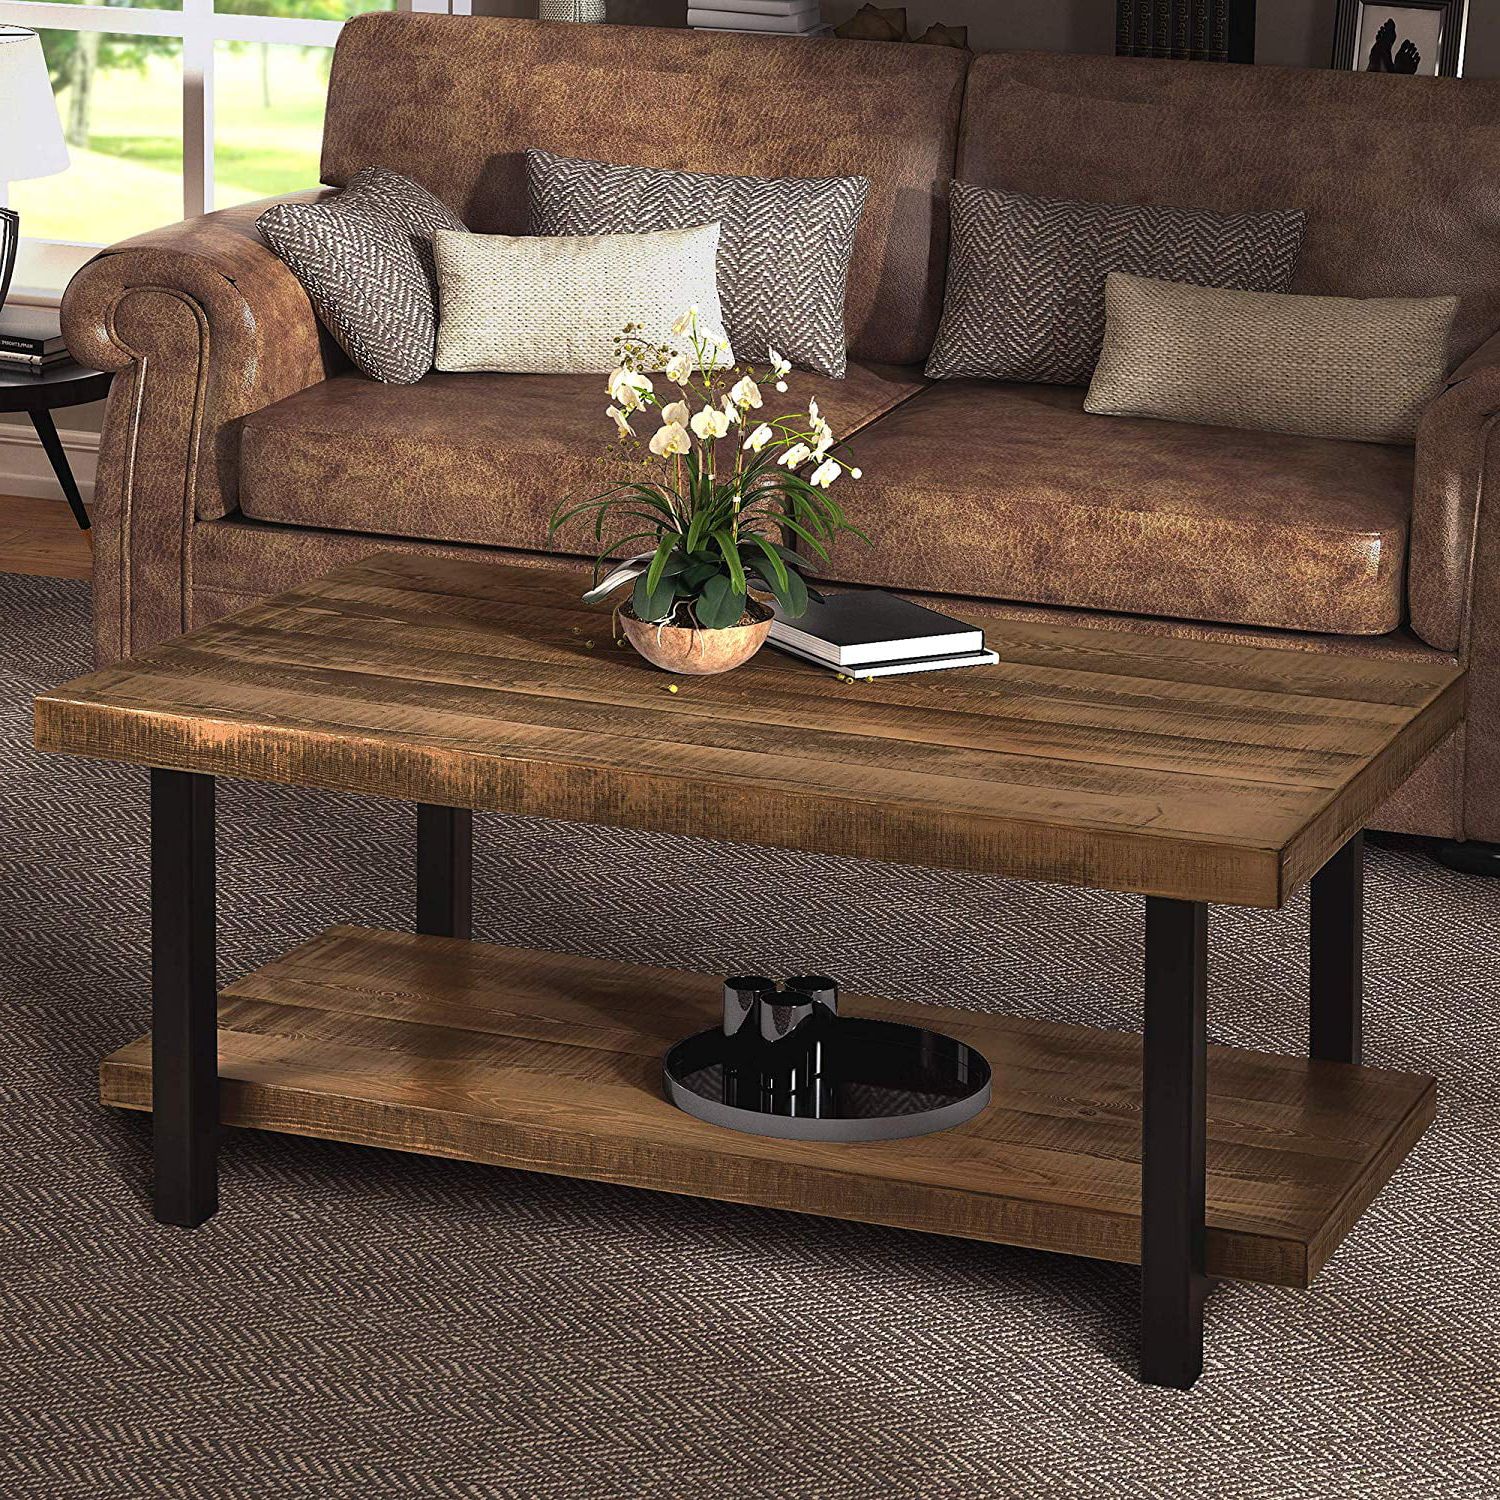 2020 Rustic Wood Coffee Tables For Harper&bright Designs Industrial Rectangular Pine Wood Coffee Table (Photo 4 of 15)